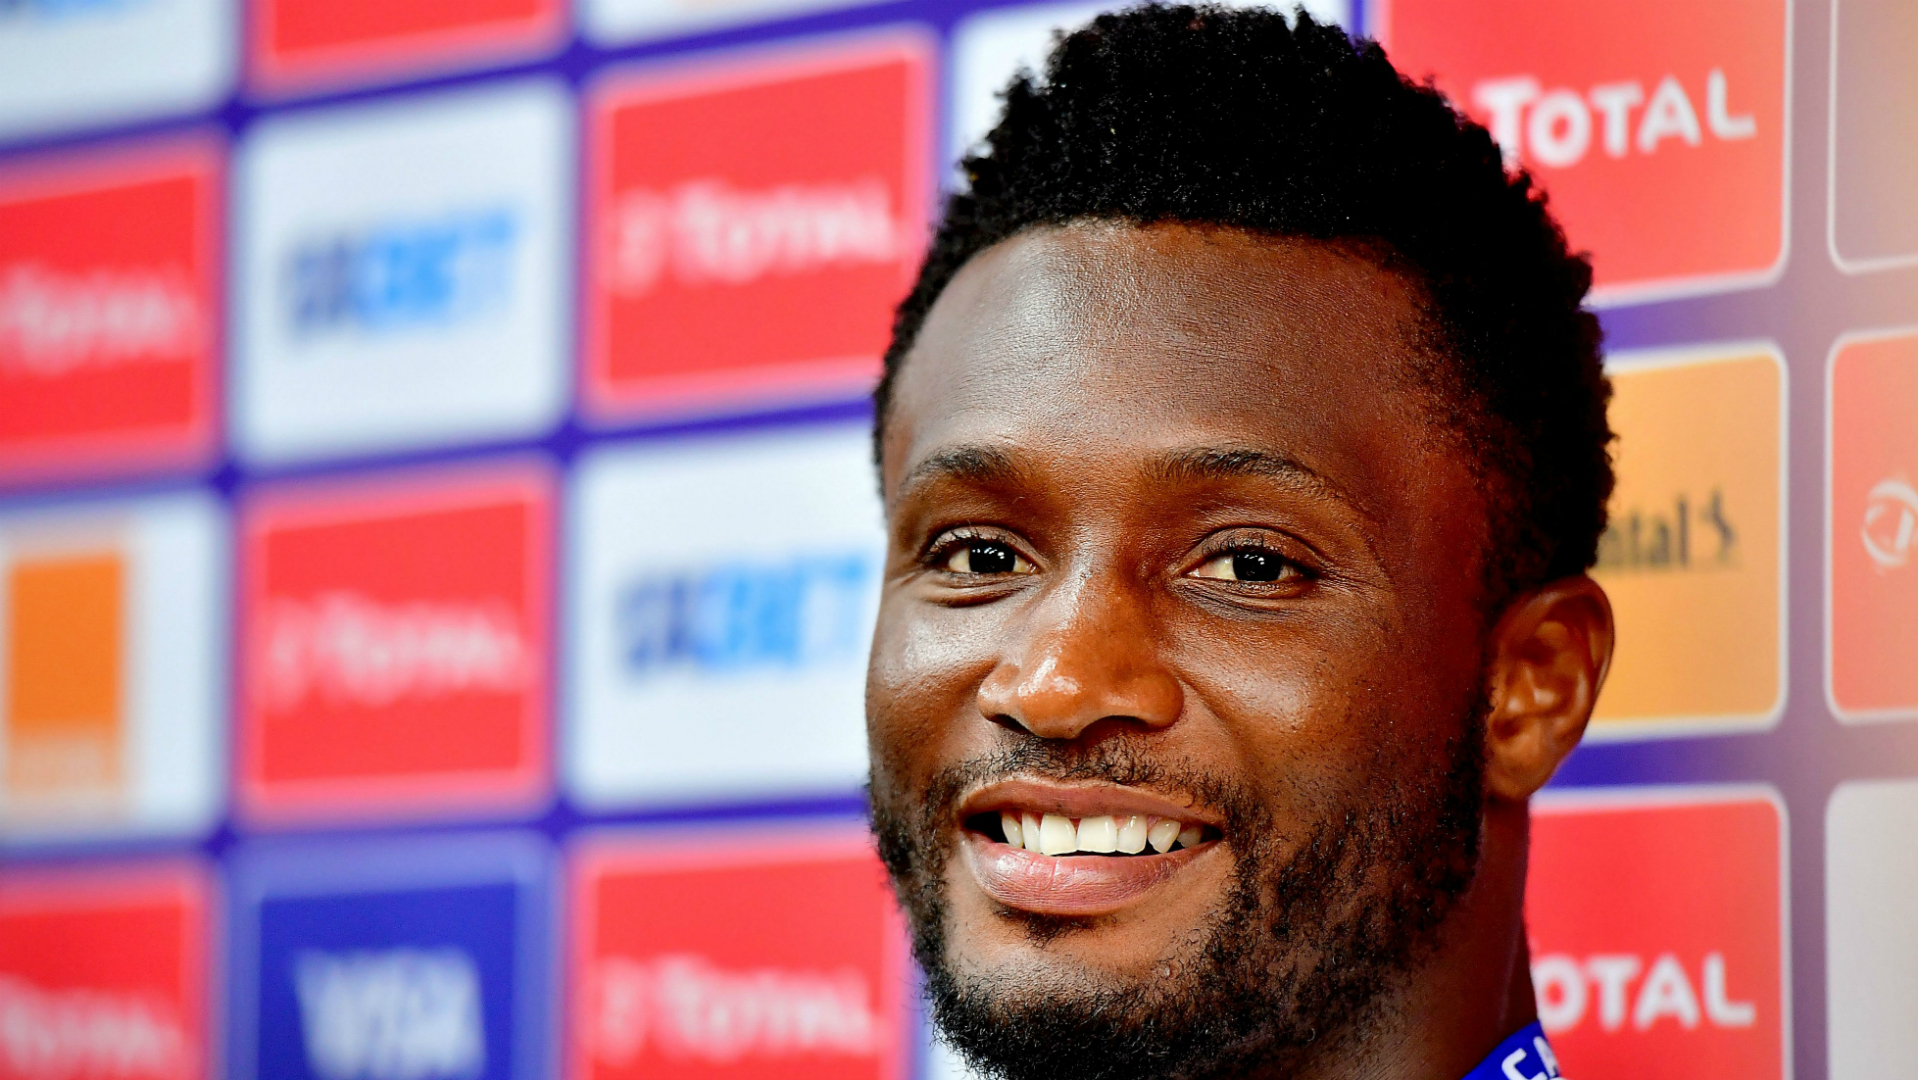 ‘Titles are not won in the grave’ – Pascal backs Mikel’s Trabzonspor exit decision